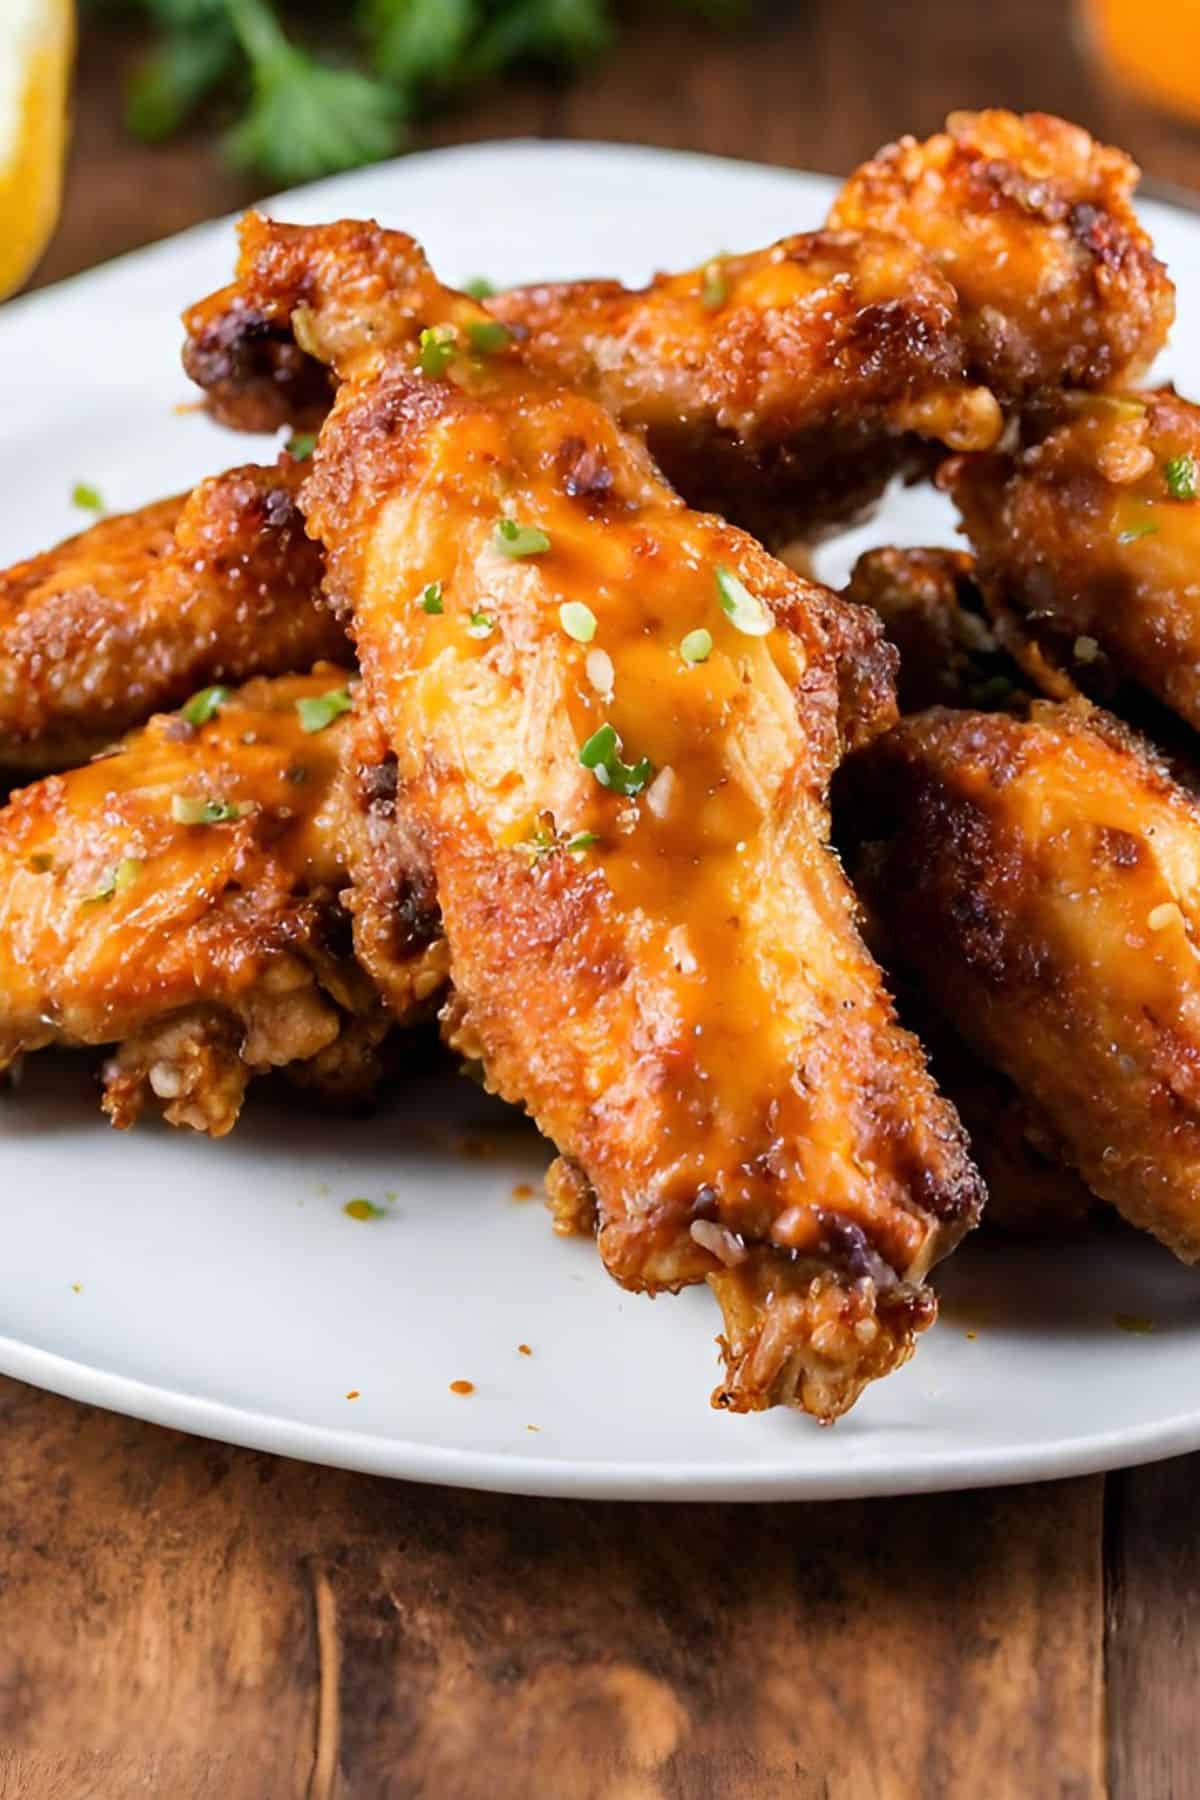 Crispy baked chicken wings on a white plate with lemon wedges.